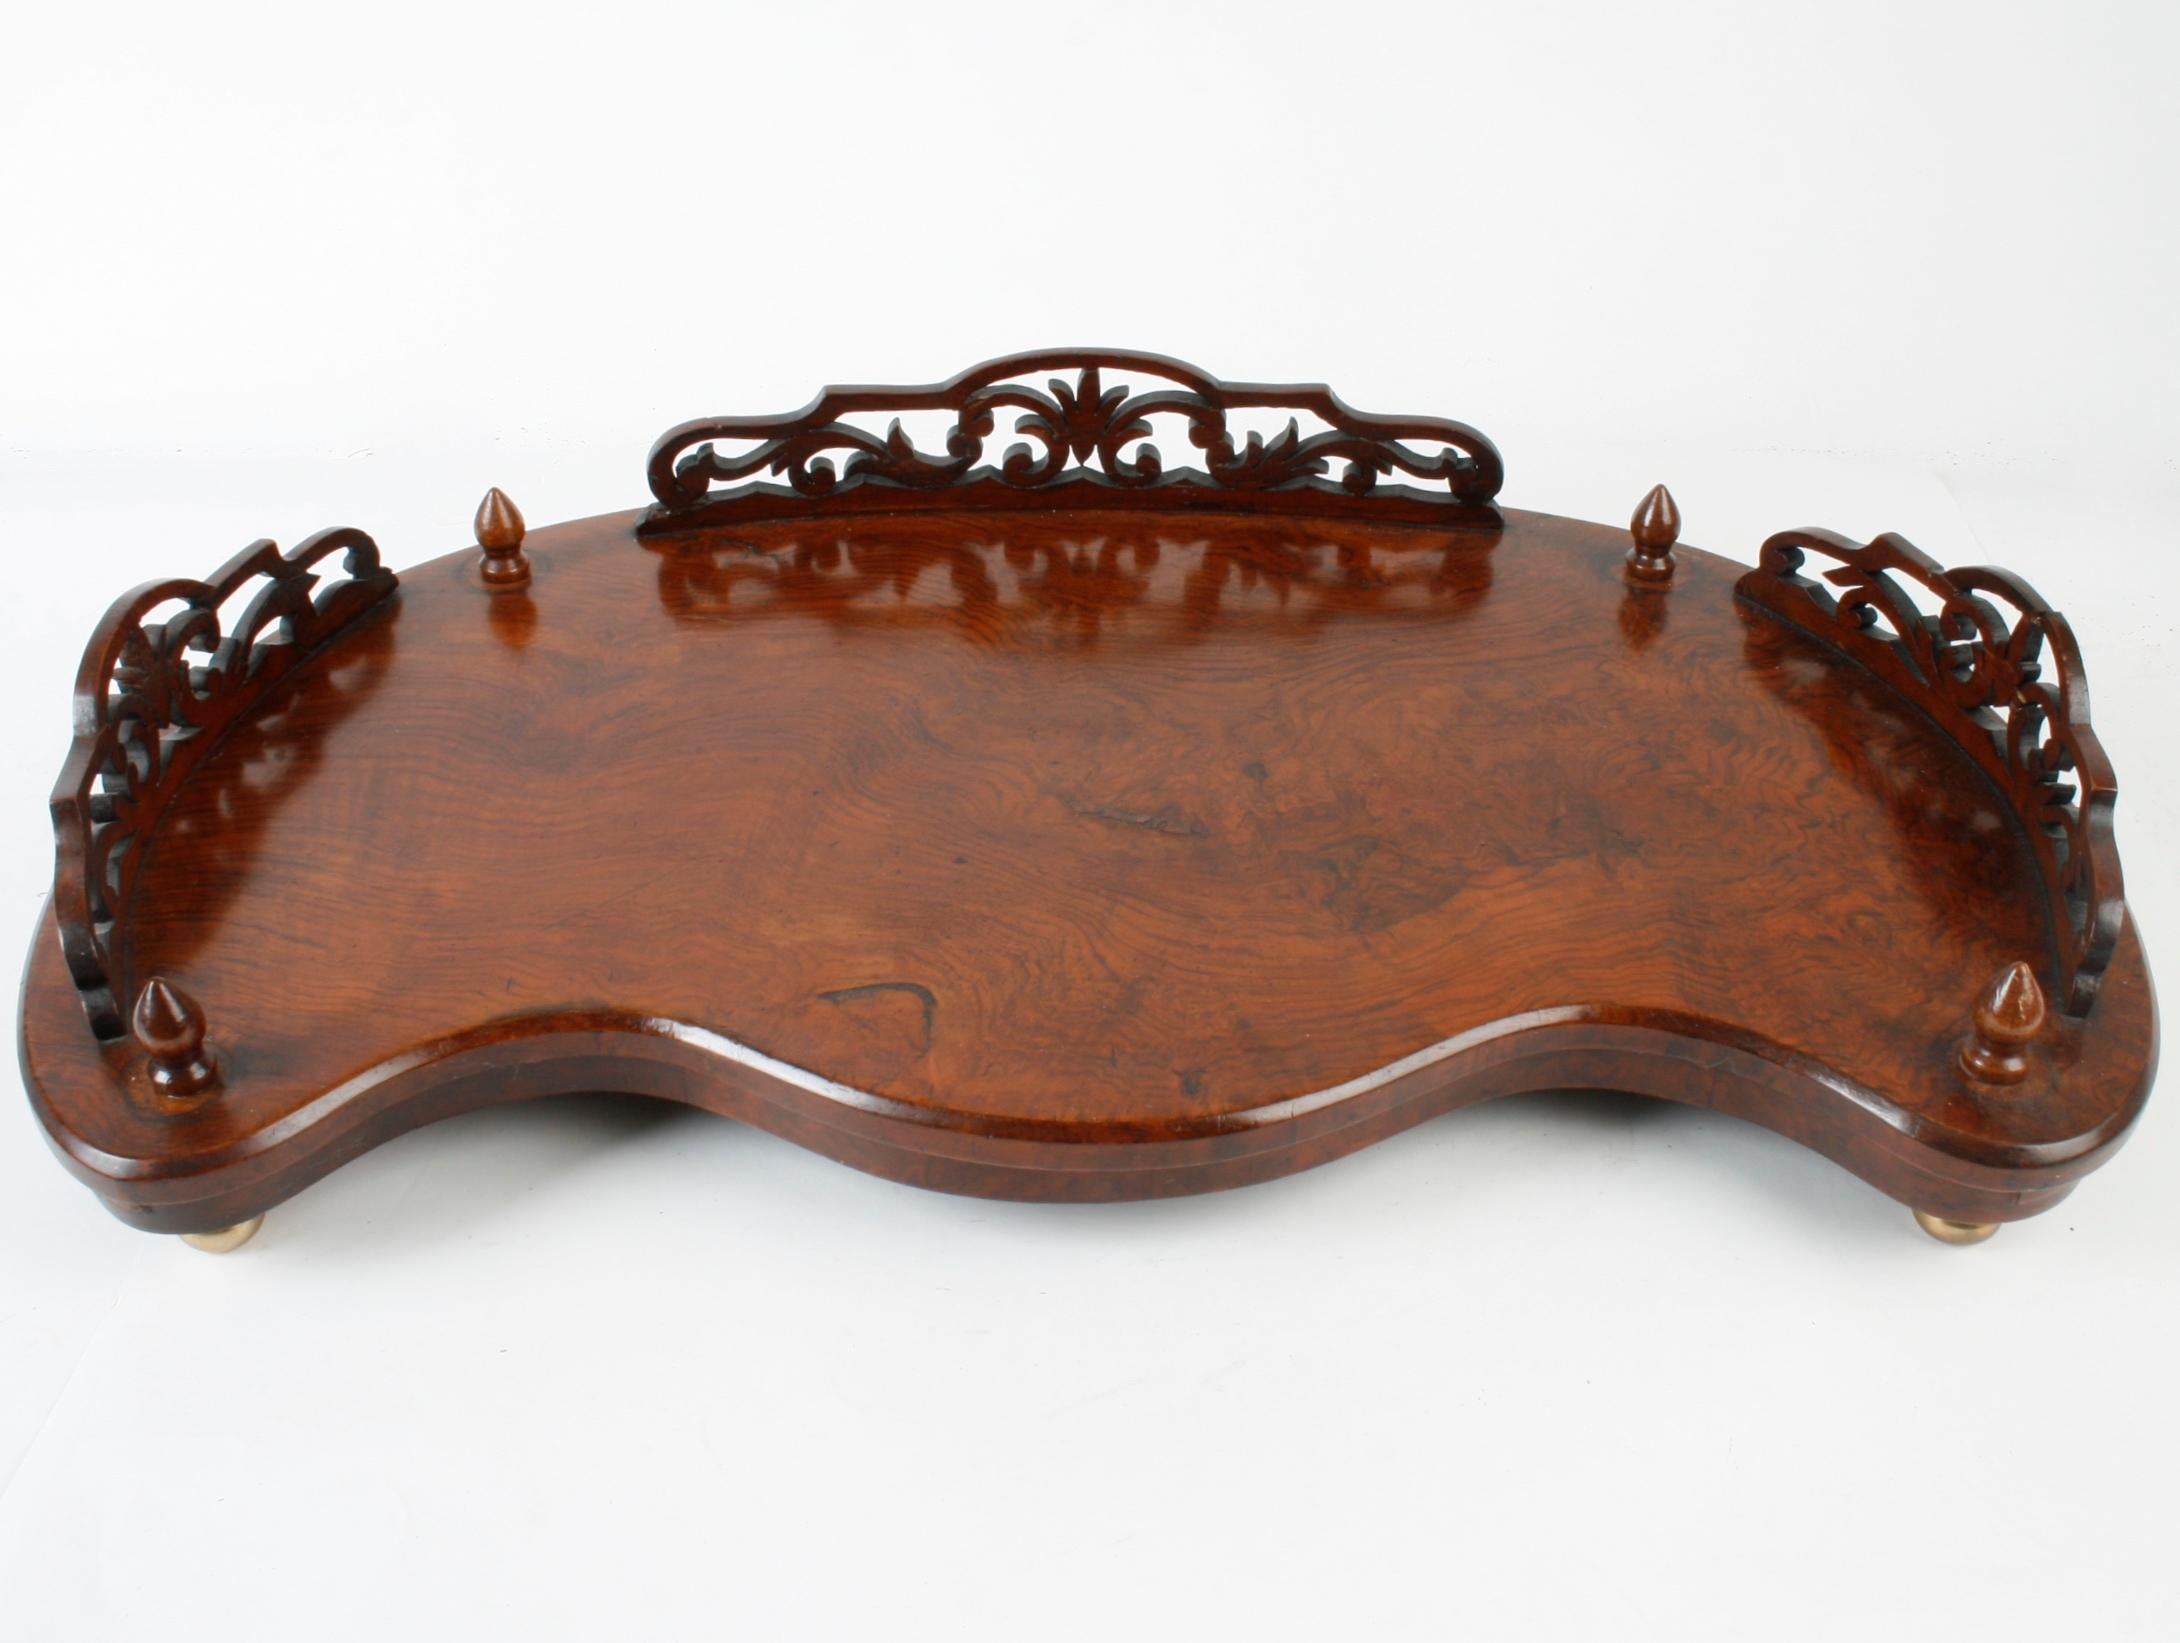 A Victorian rosewood dressing table tray with pierced gallery and brass ball feet, circa 1840. It has a beautiful kidney shape and wood finials.
N.P. Trent has been a respected name in antiques for over 30 years with a large collection of period